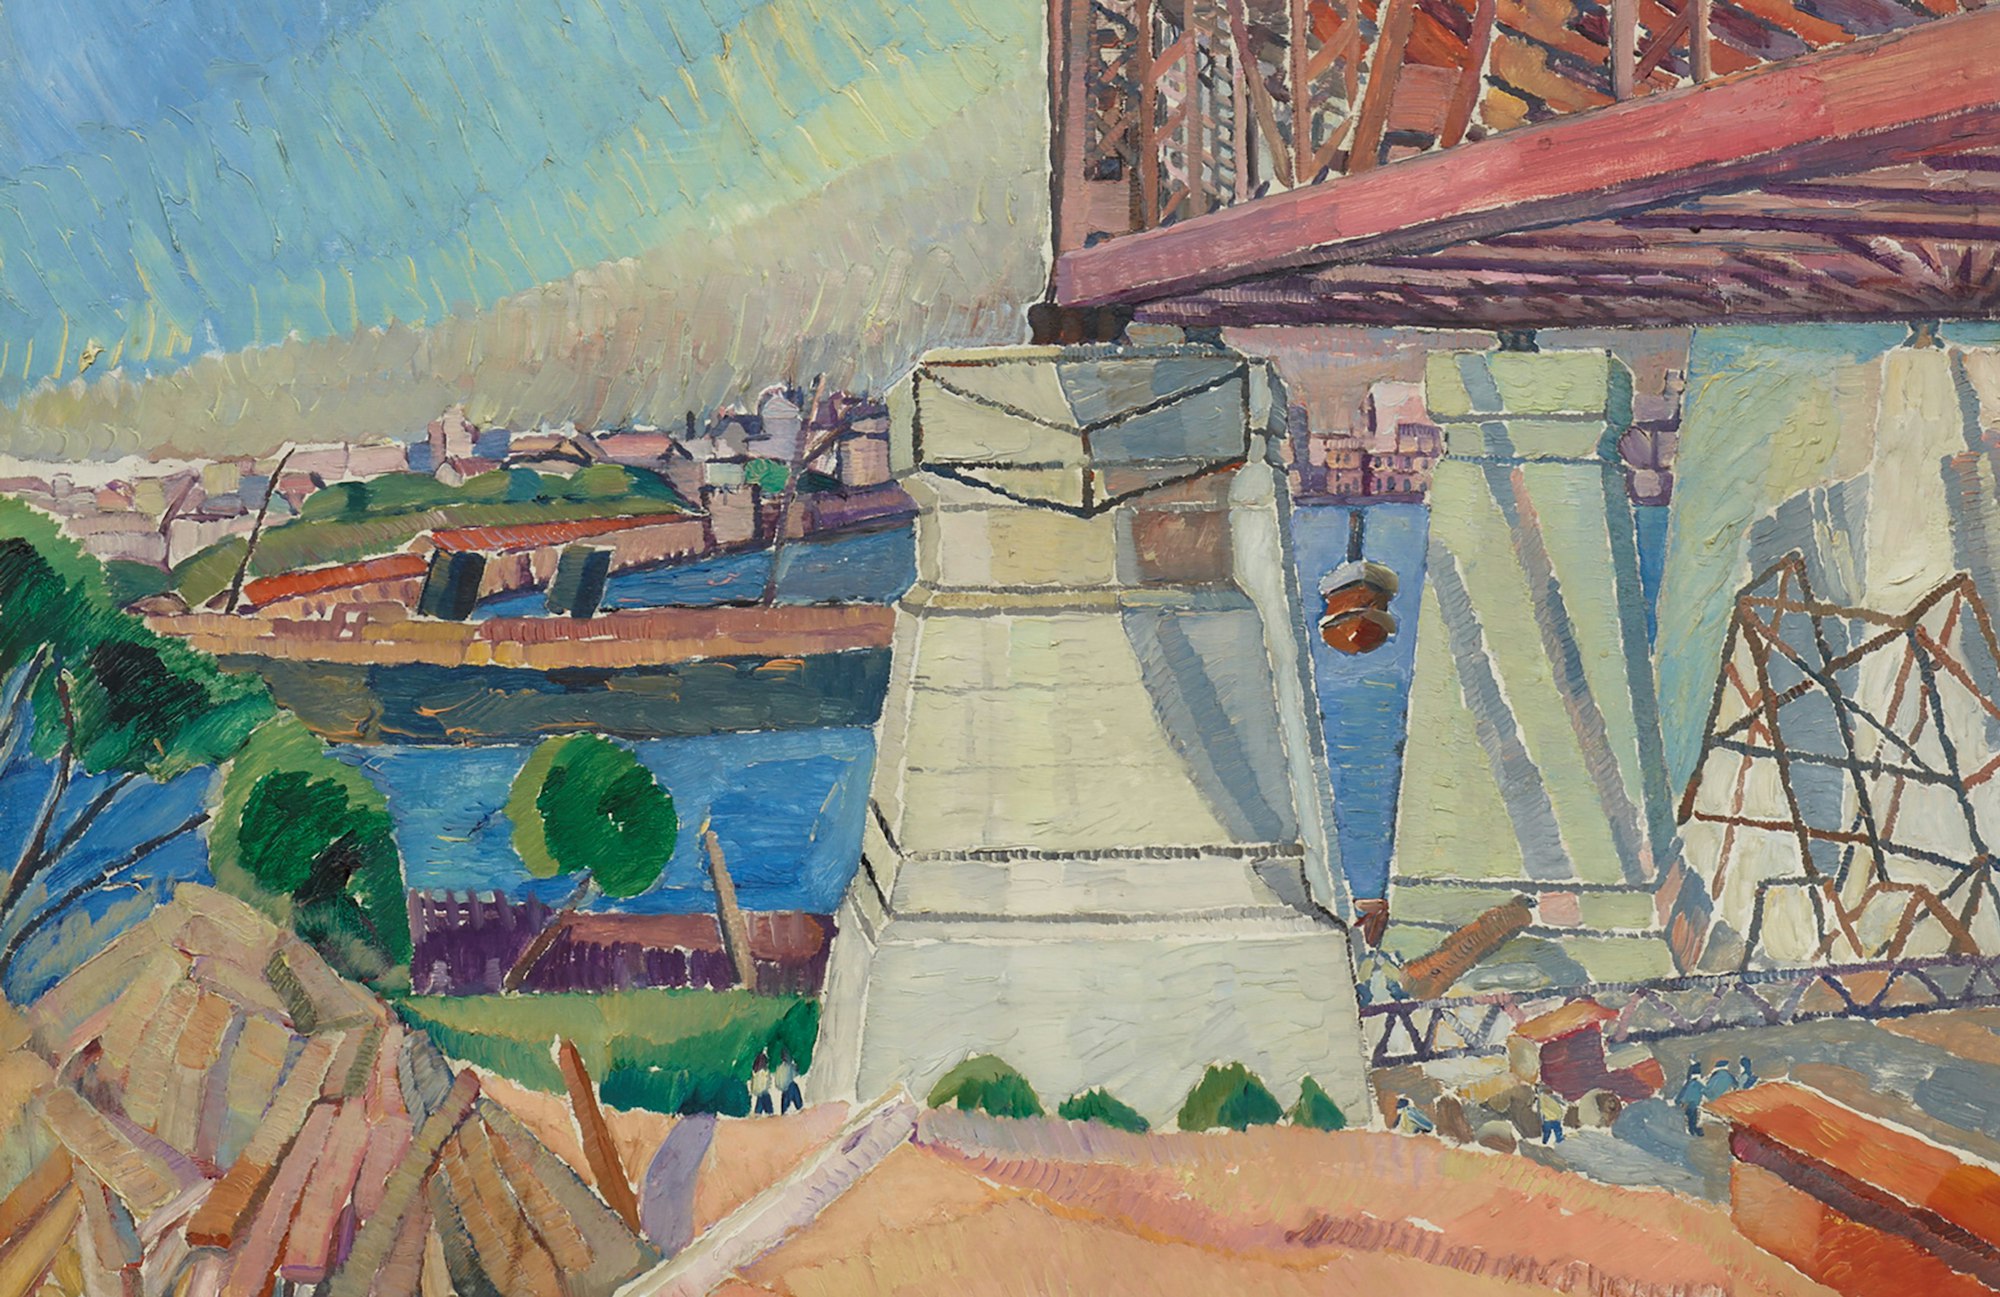 Grace Cossington Smith The curve of the bridge 1928–1929 (detail), Art Gallery of New South Wales 